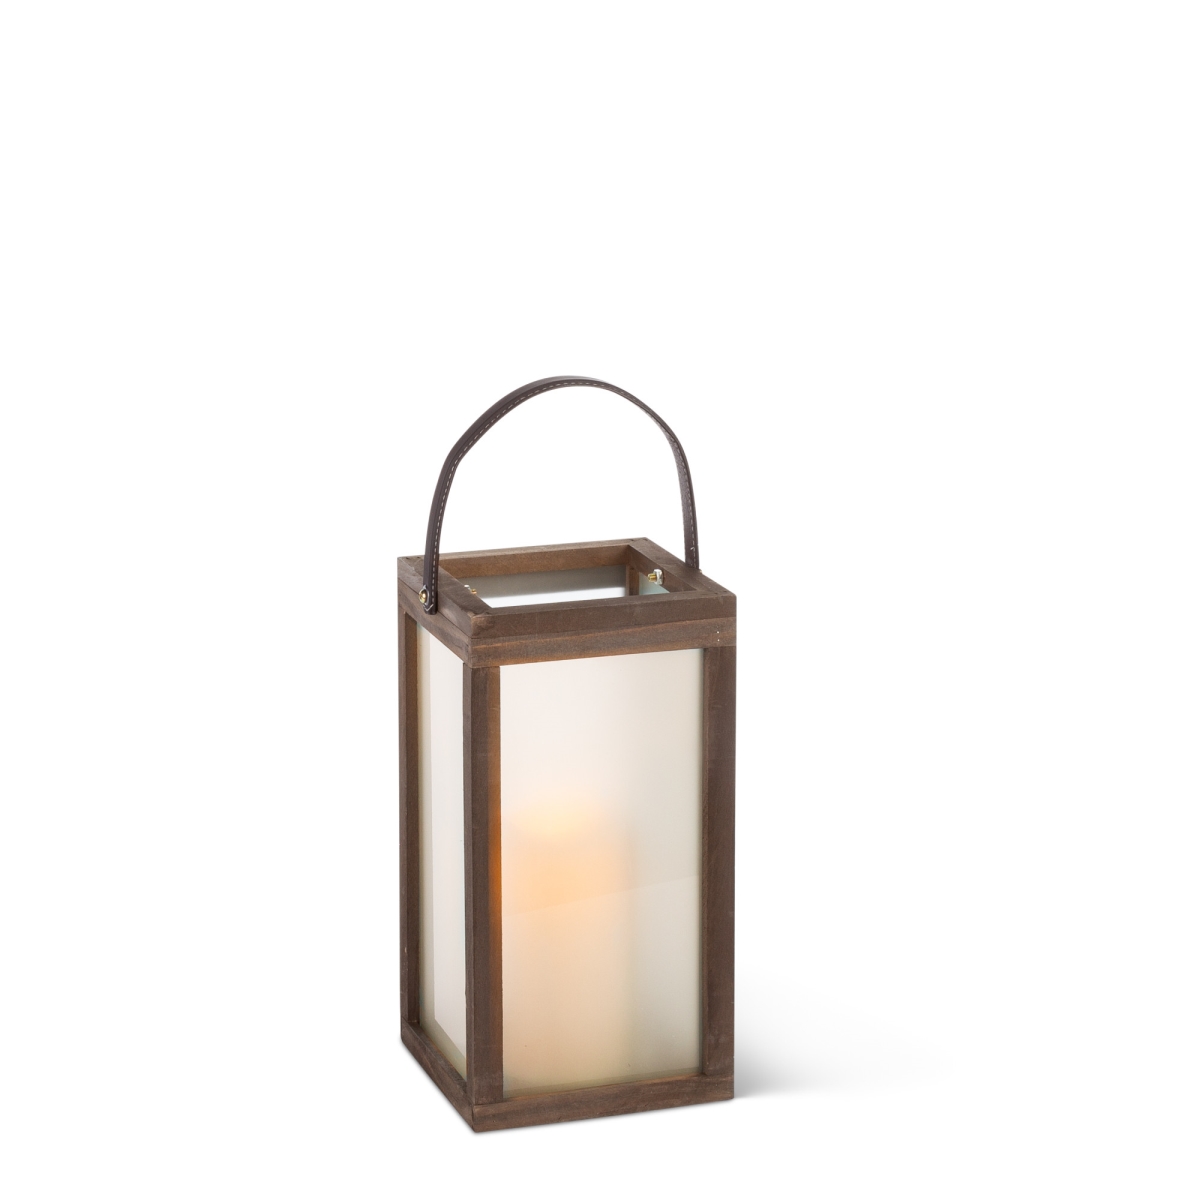 Gerson 44638ec 12 In. Rustic Wood Lantern With Frosted Glass Panes, Warm White Led & Timer - Bronze - Set Of 2